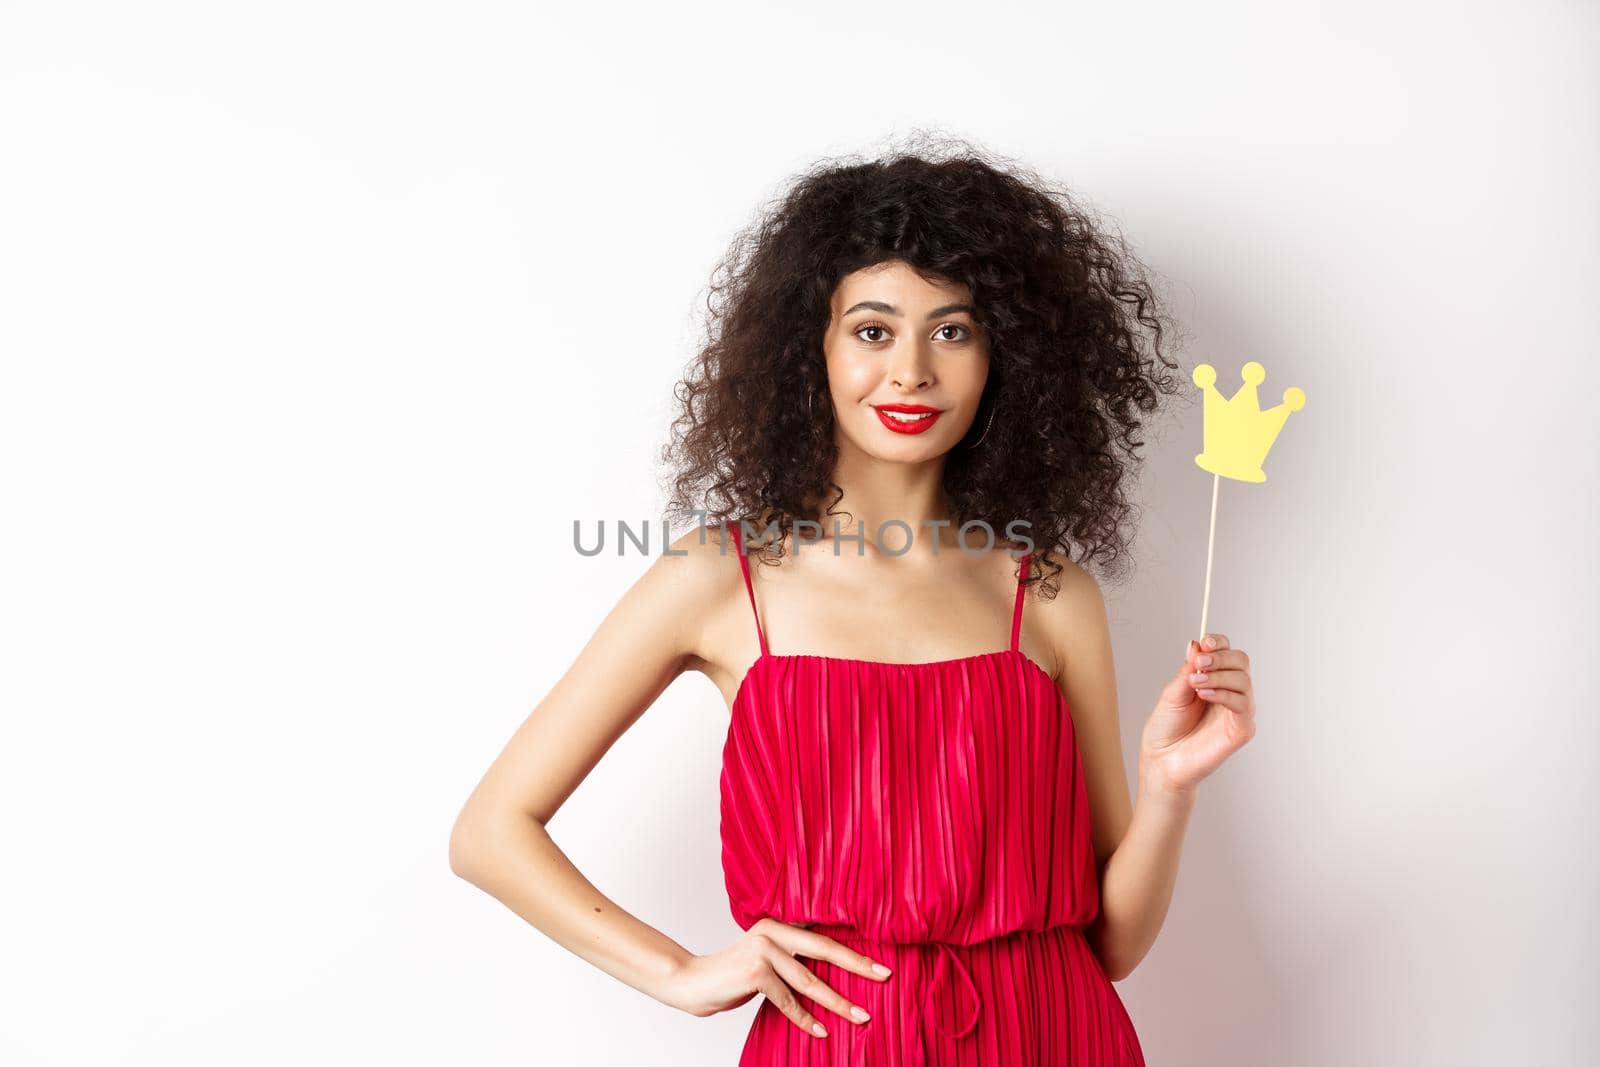 Stylish young woman in red dress, feeling confident and sassy, holding crown and smiling, standing over white background.